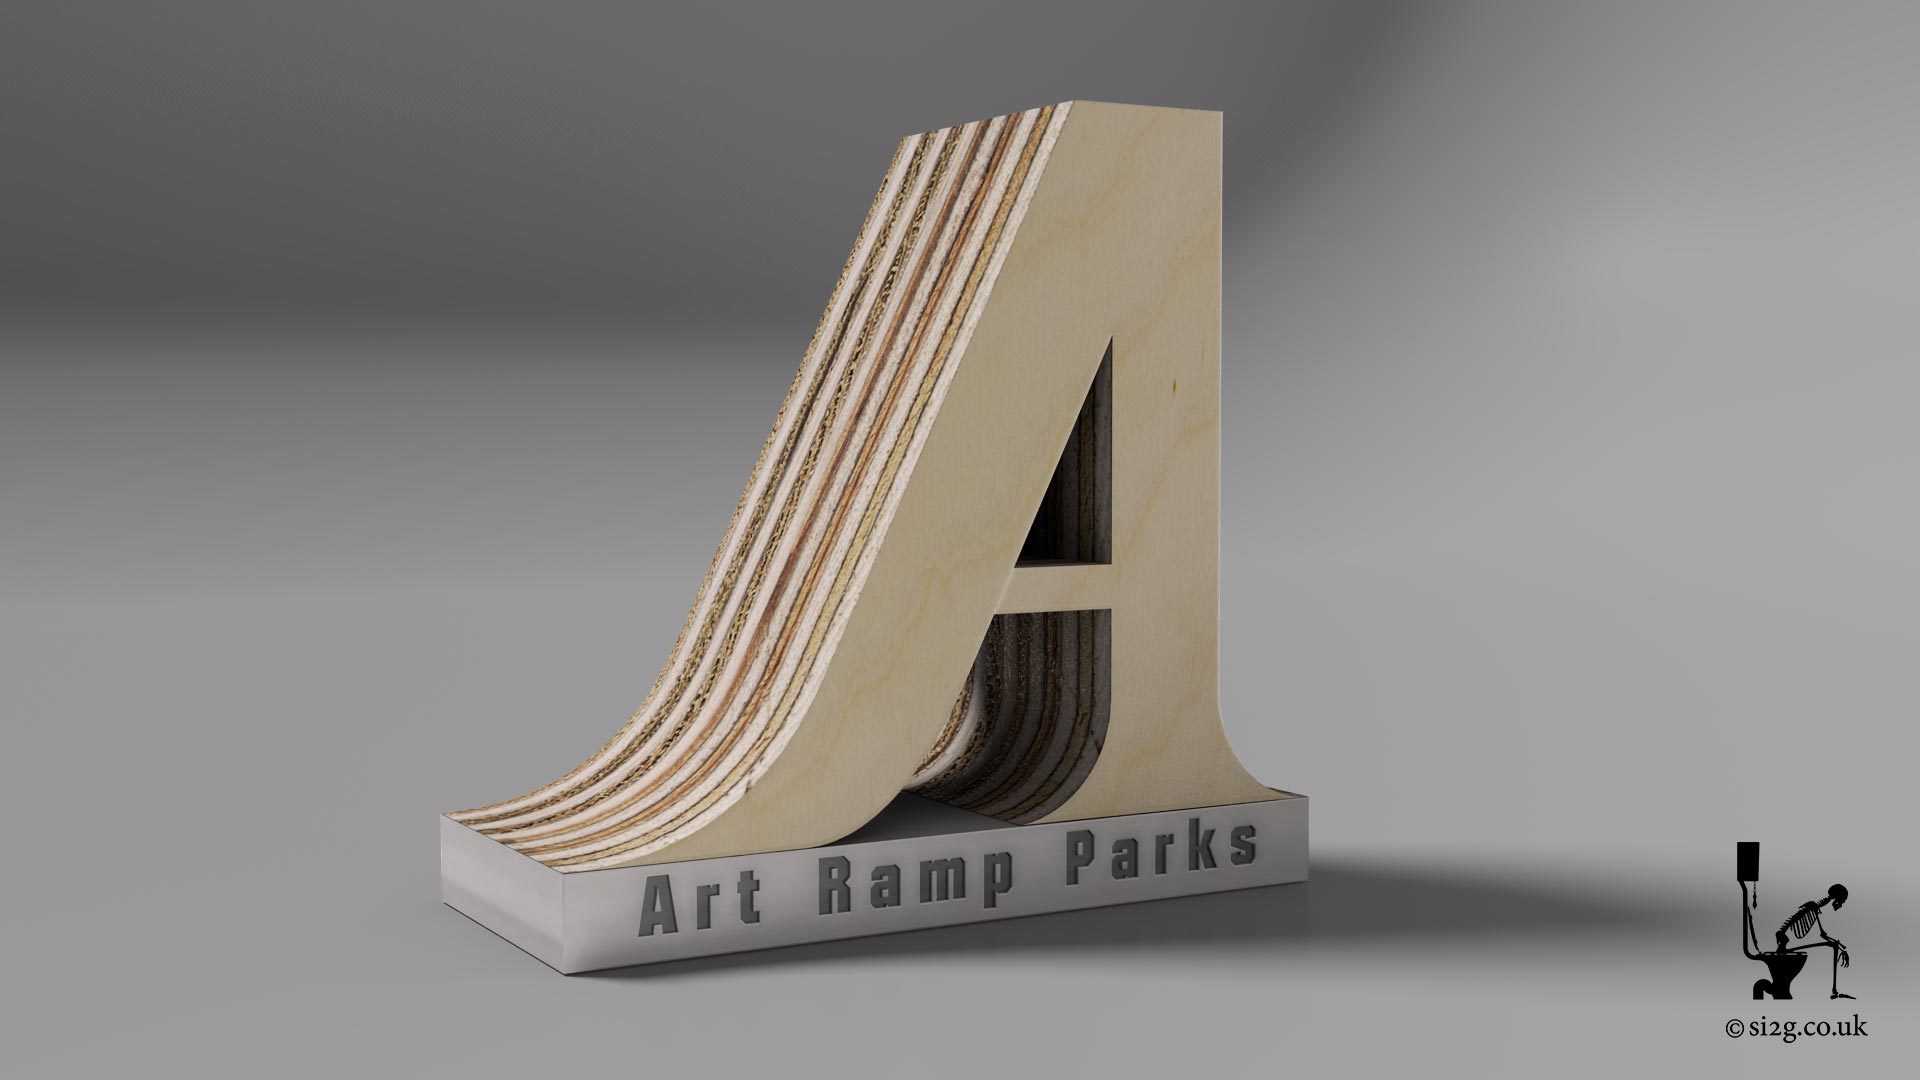 Skatepark Builders Logo - This client wanted their simple 2D logo to look more like some of their skatepark designs.  The brief was to redesign the logo in 3D and make it look like it was made from 18mm marine ply.  The final design was provided cut out and separate from the background, allowing them more flexibility in its application.